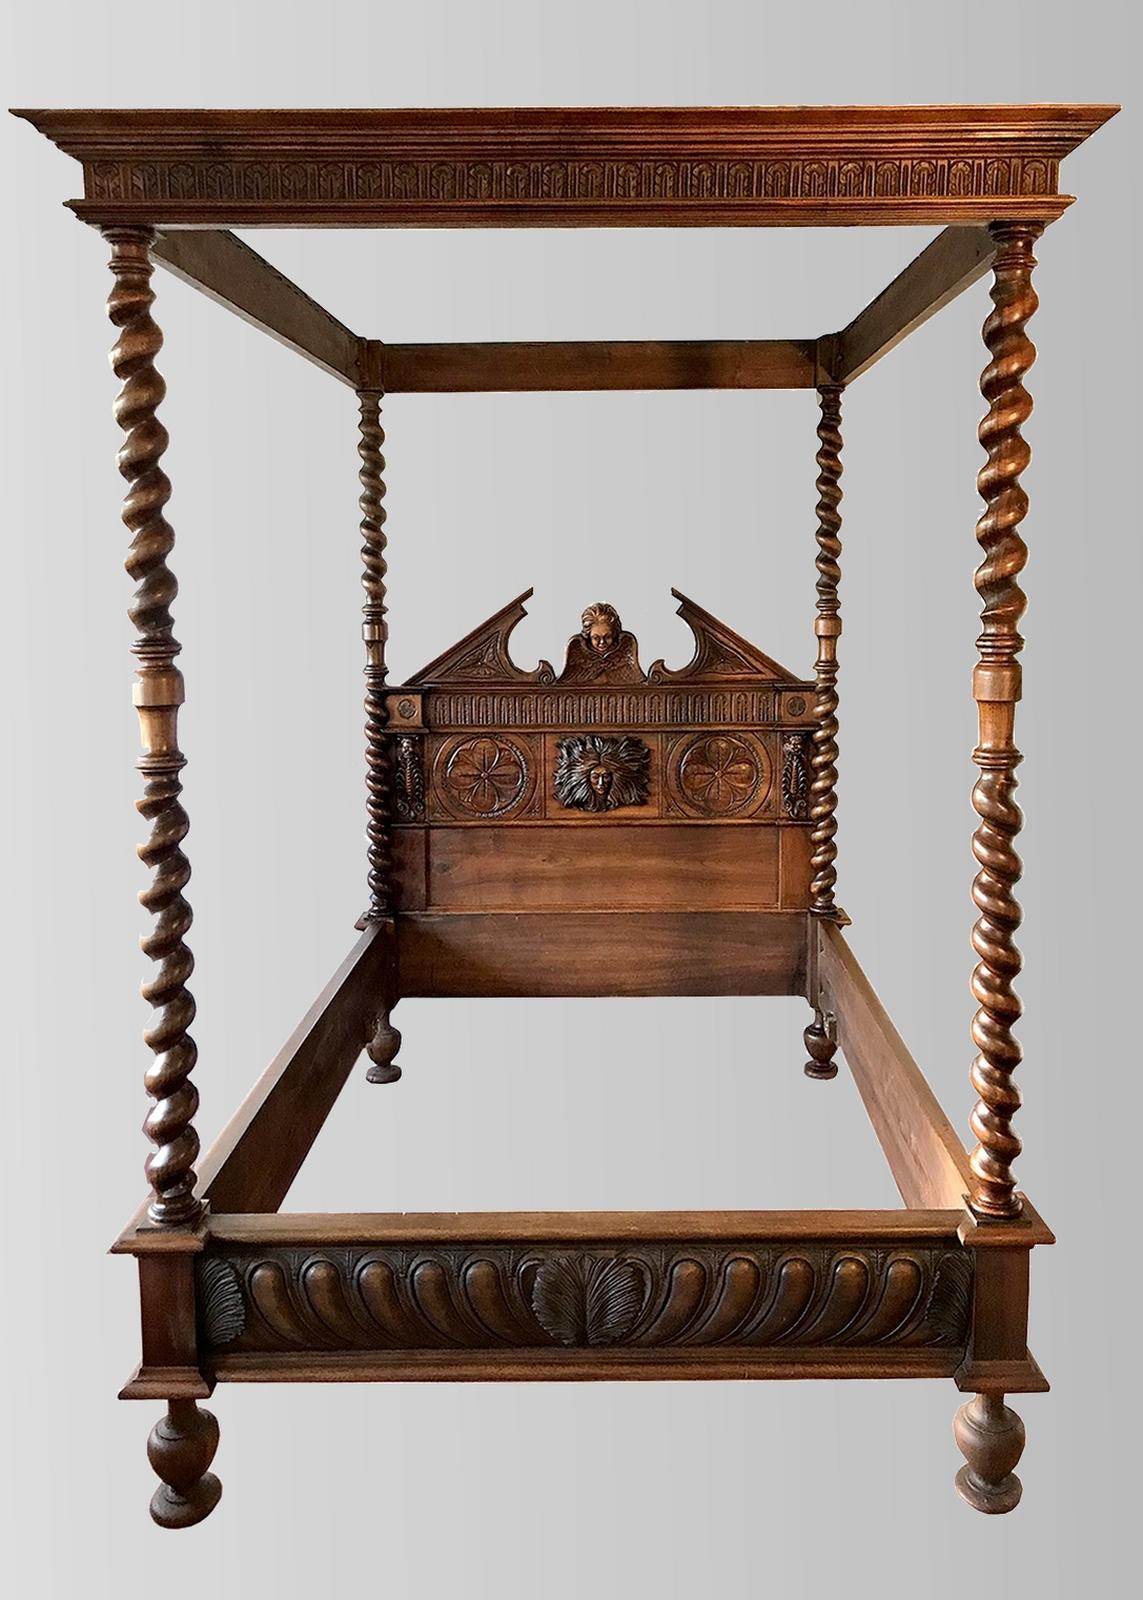 Pretty canopy bed in solid walnut paneled and carved, decorated with marmosets, palmettes and rosettes.
Four twisted Louis XIII style columns support the marquee decorated with palm leaves and surmounted by a cornice.
The crosspieces are decorated